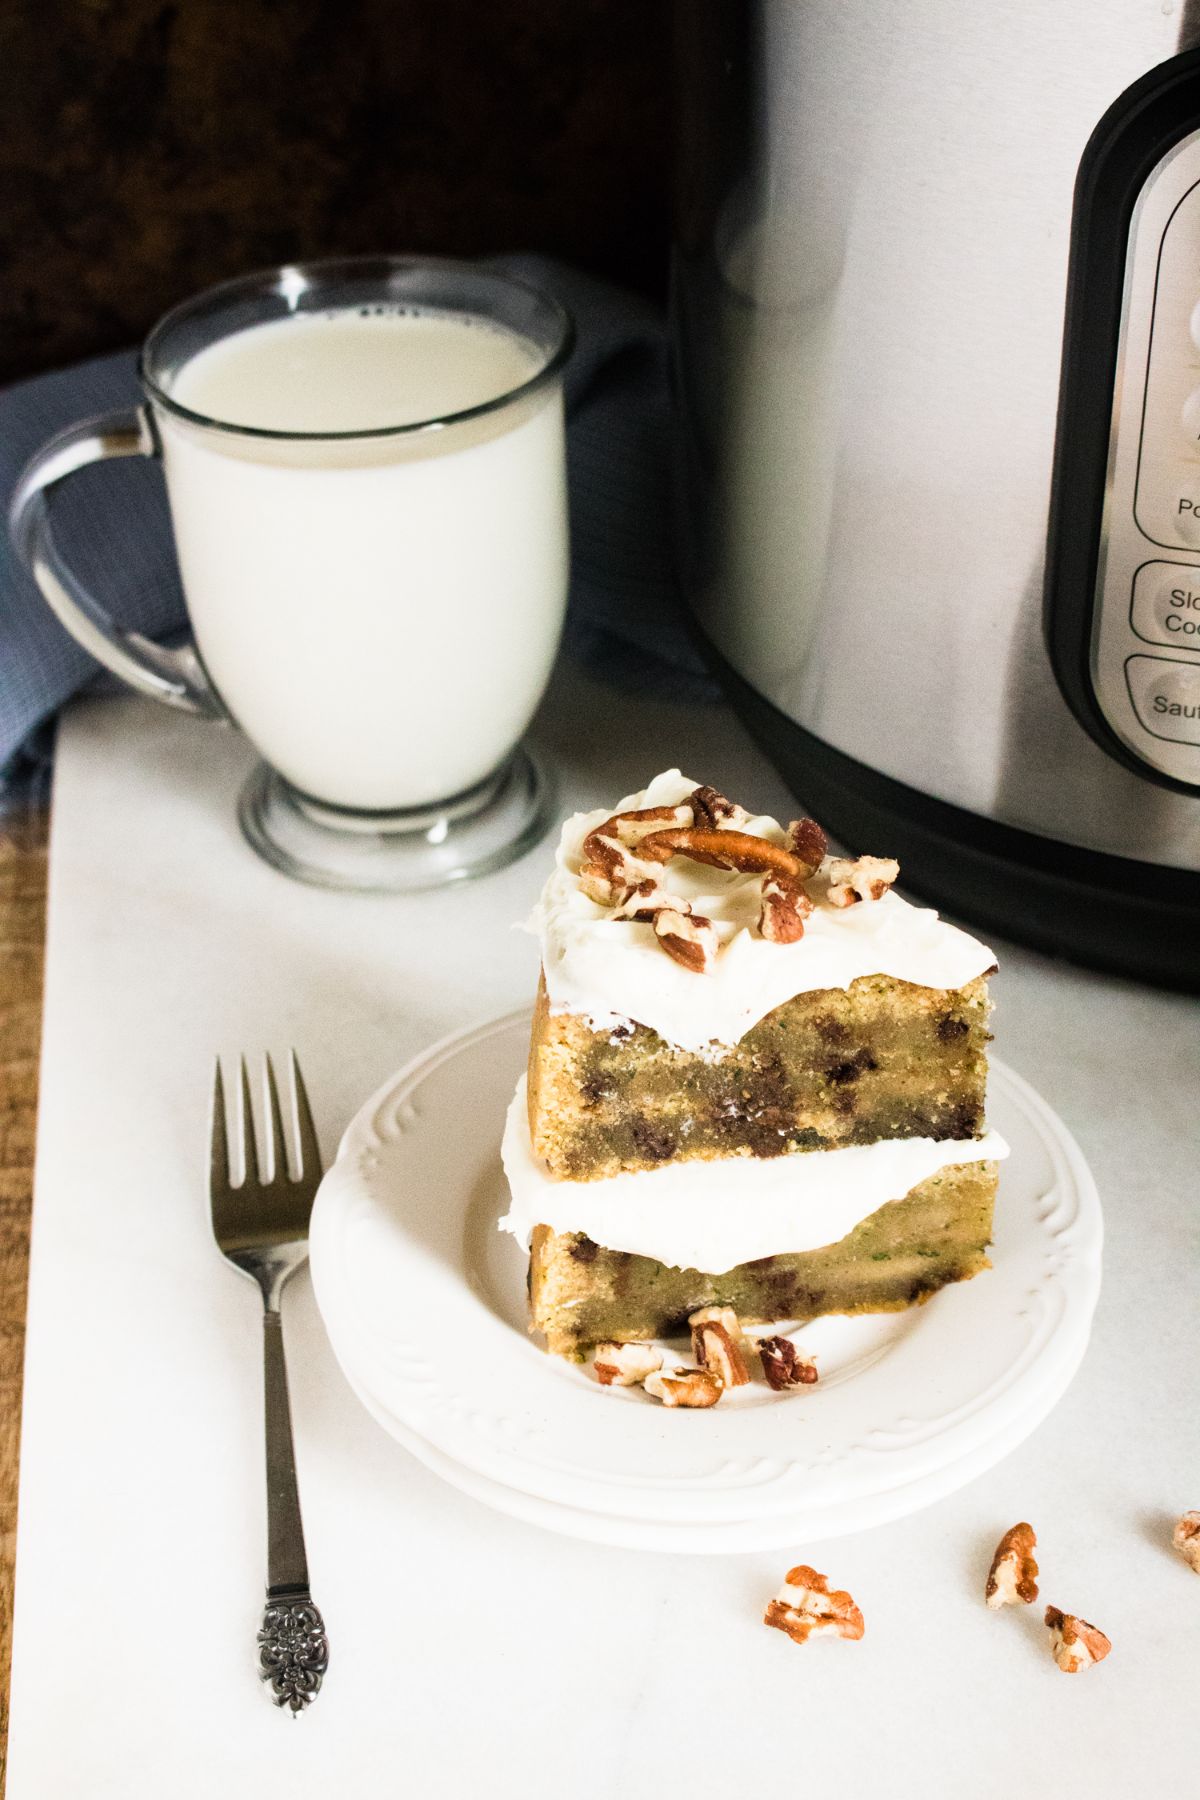 A slice of the Zucchini bread on a serving plate with a glass of milk in the background and a fork beside it.